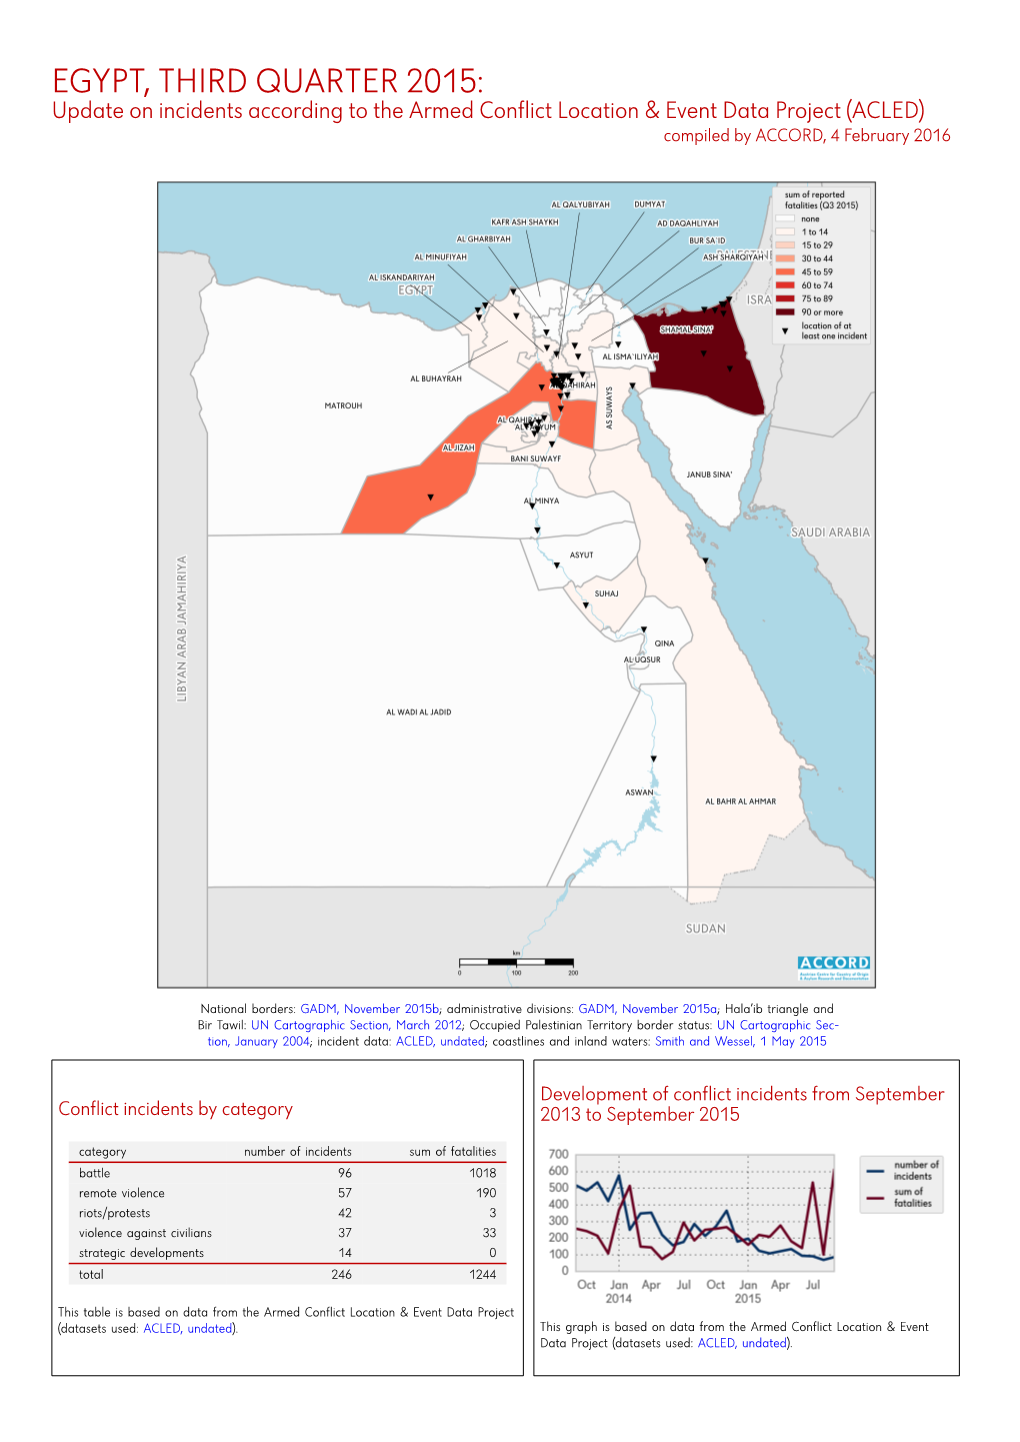 EGYPT, THIRD QUARTER 2015: Update on Incidents According to the Armed Conflict Location & Event Data Project (ACLED) Compiled by ACCORD, 4 February 2016